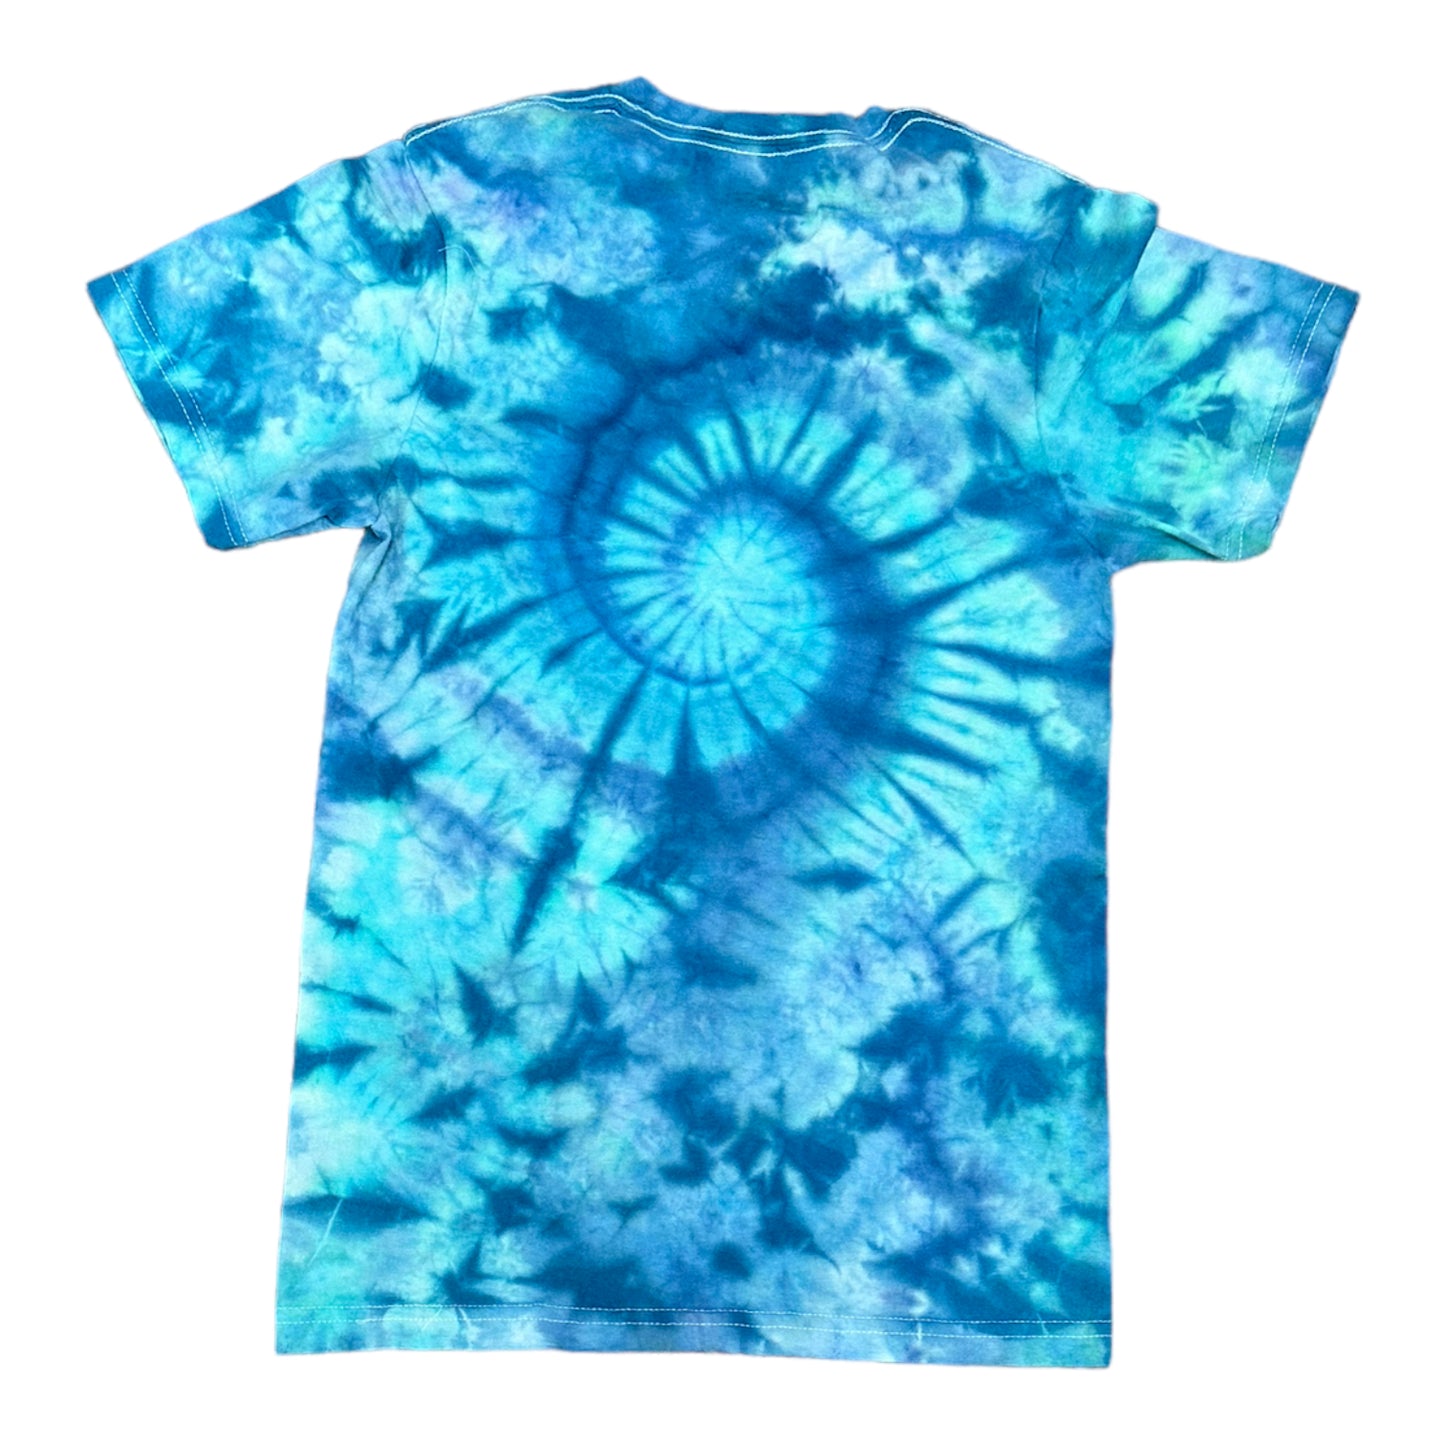 Adult XS Blue and Green Spiral and Scrunch Ice Dye Tie Dye Shirt